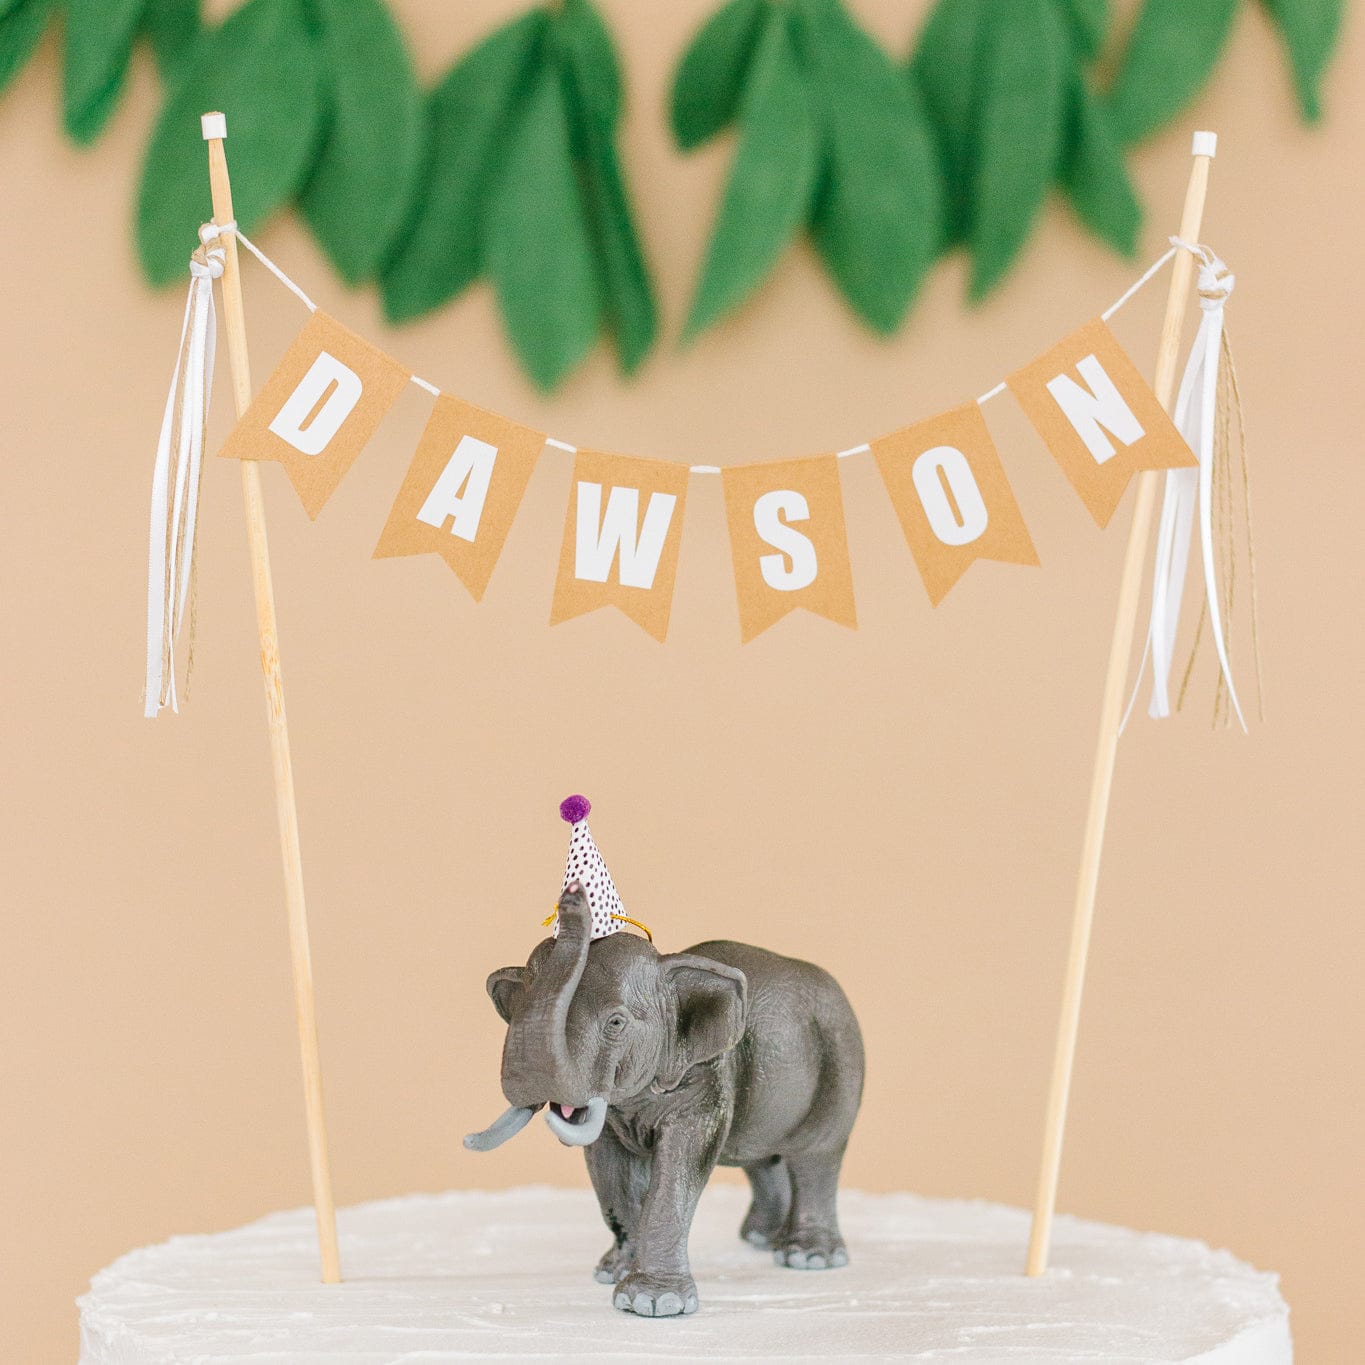 
                  
                    personalized name cake topper on a birthday cake shown with toy elephant
                  
                